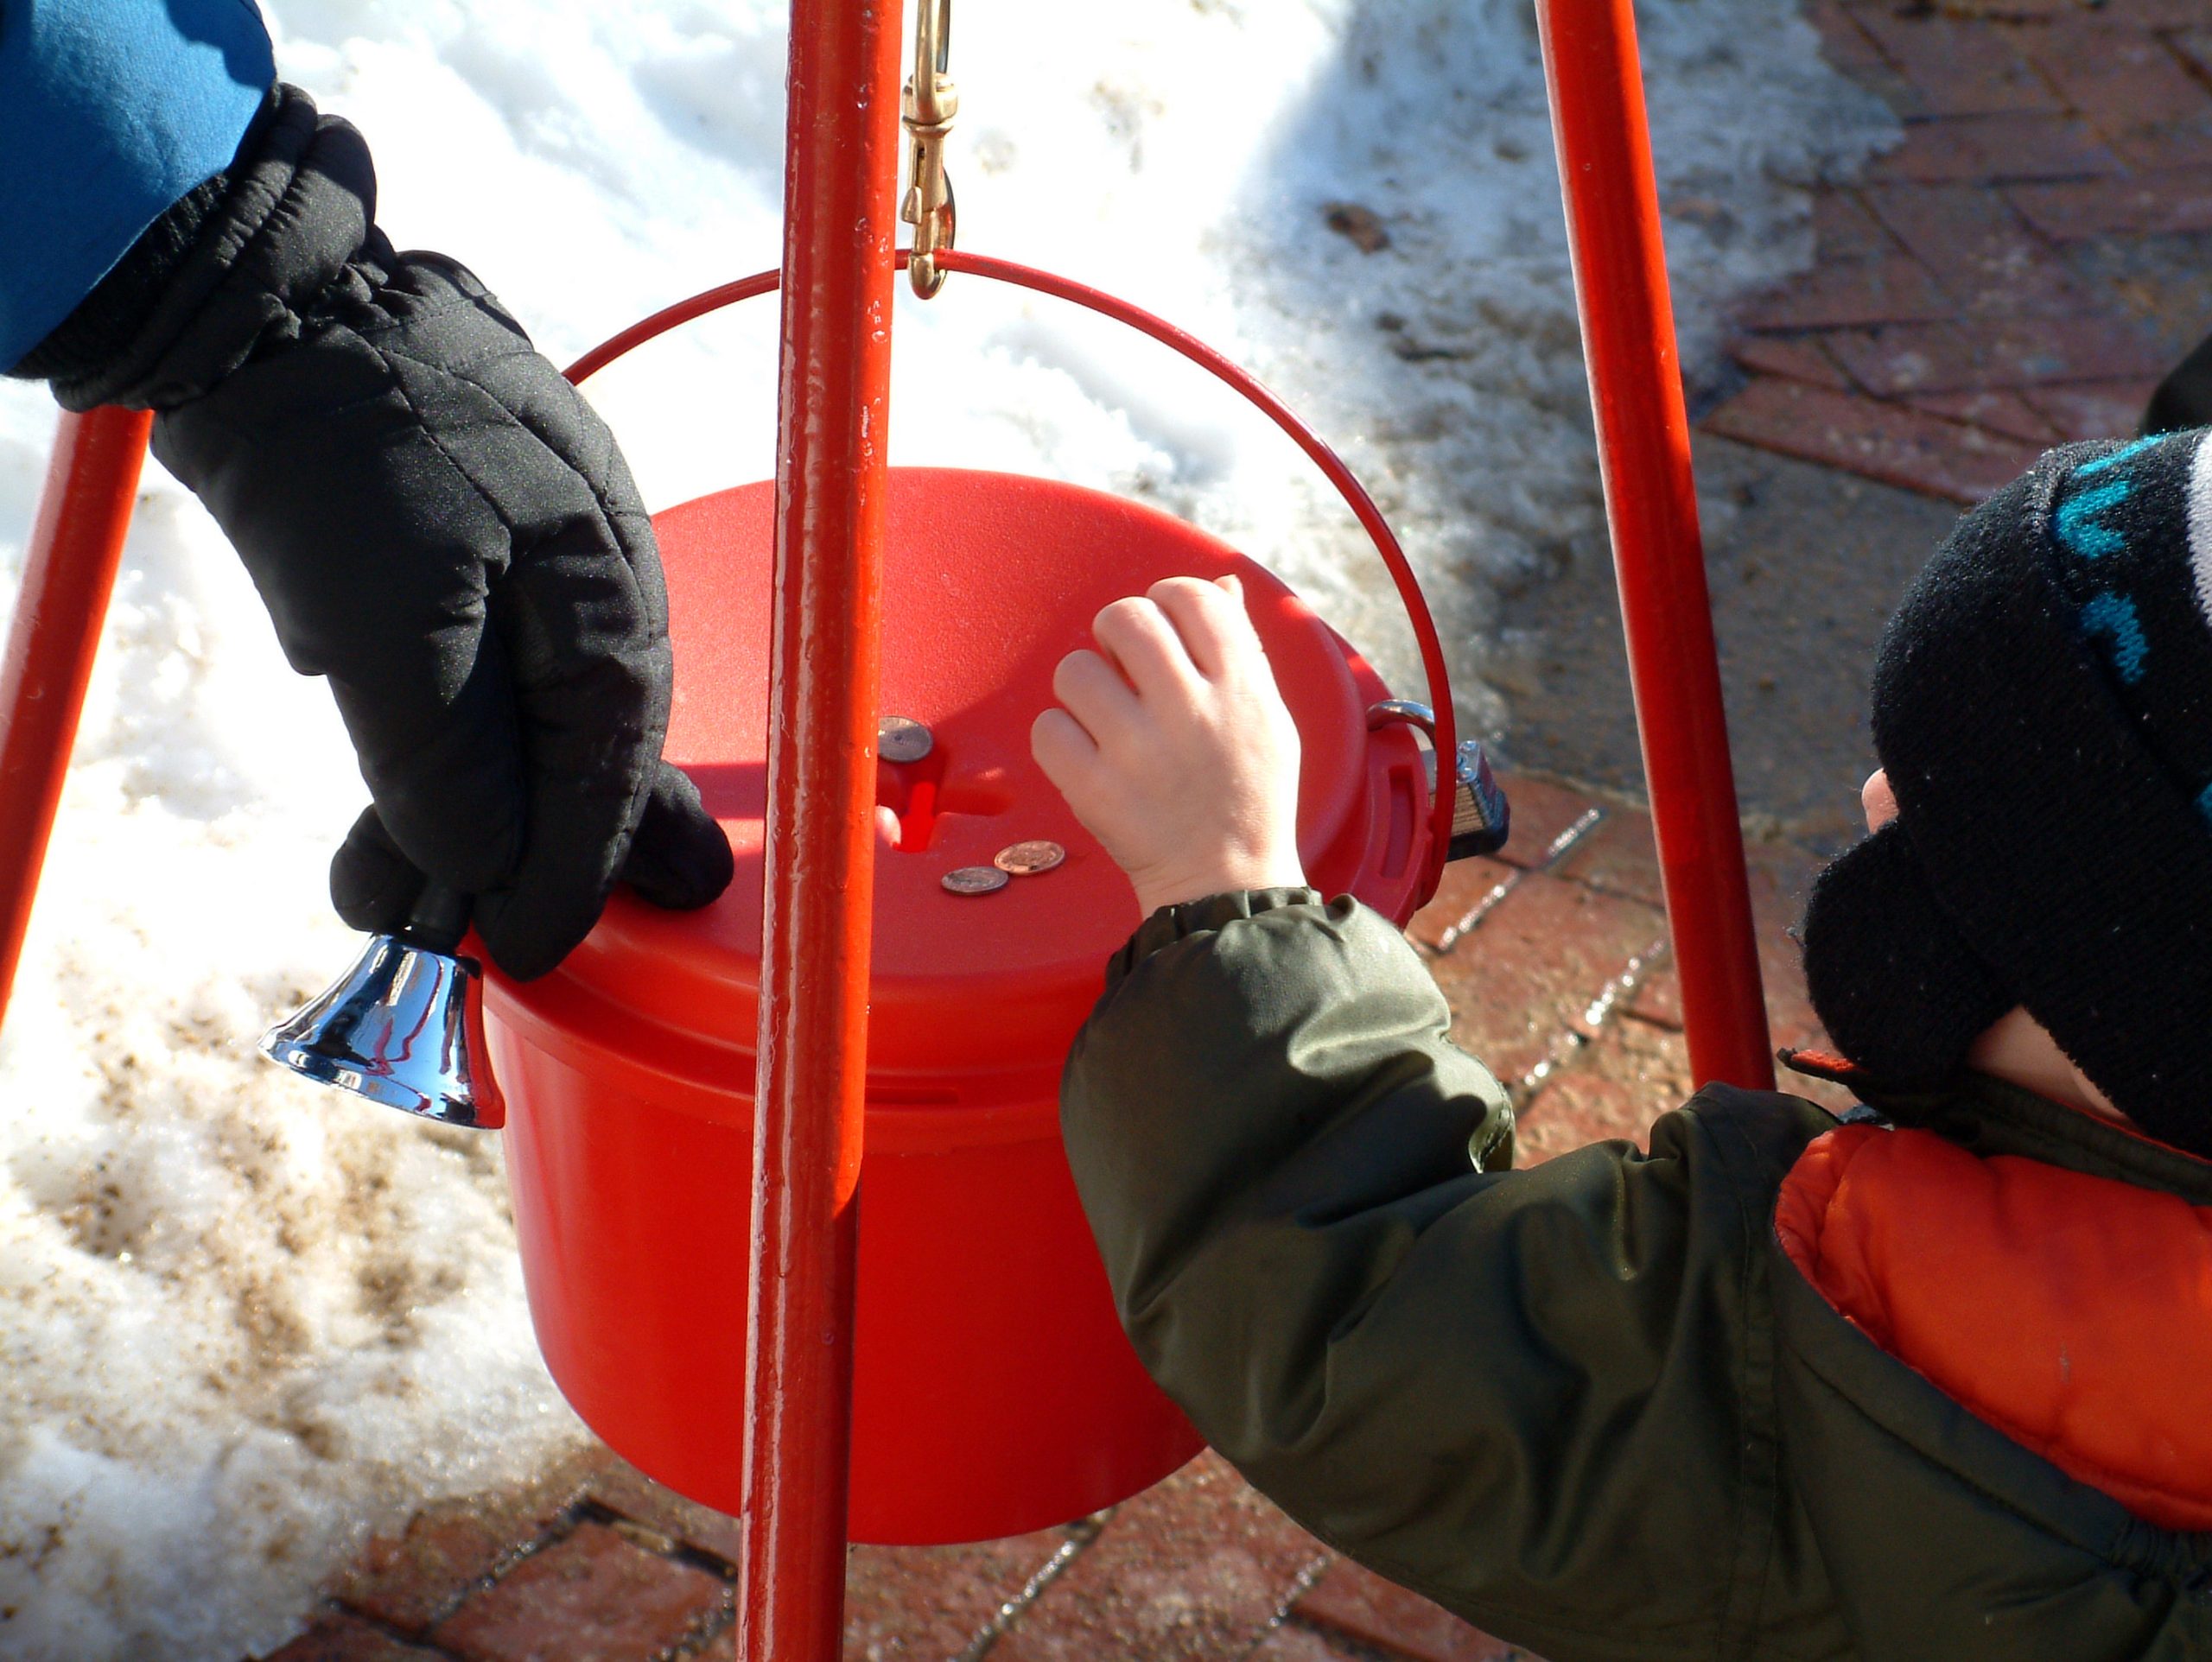 Image of a small child dressed in winter clothing, putting money in a red salvation army change kettle steadied by a gloved hand, and there is snow in the background of the photo.